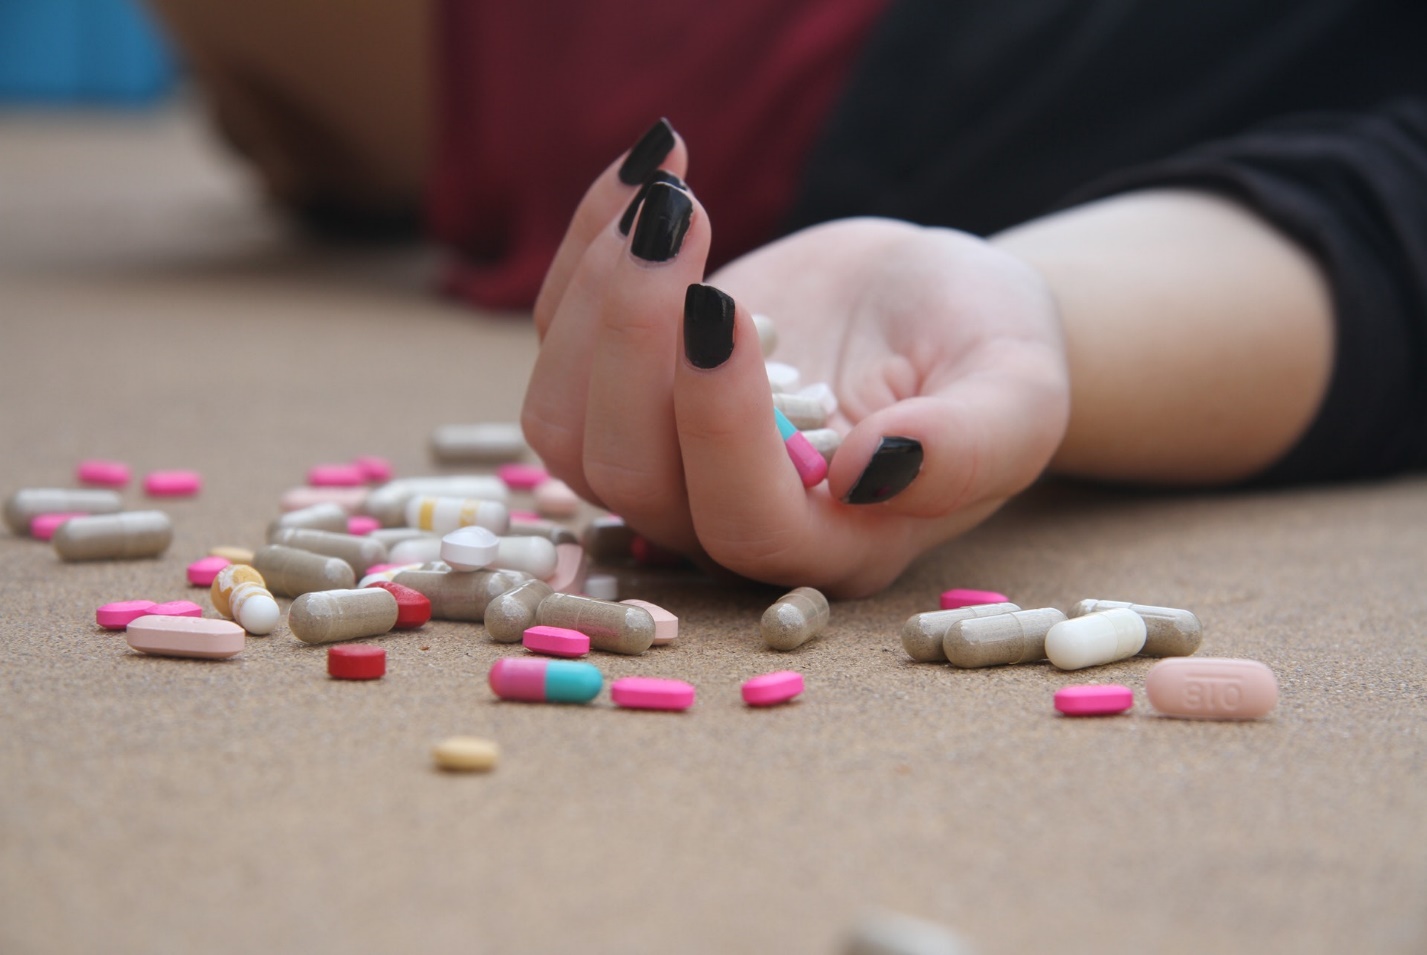 5 Tips to Recover Your Body from Addiction